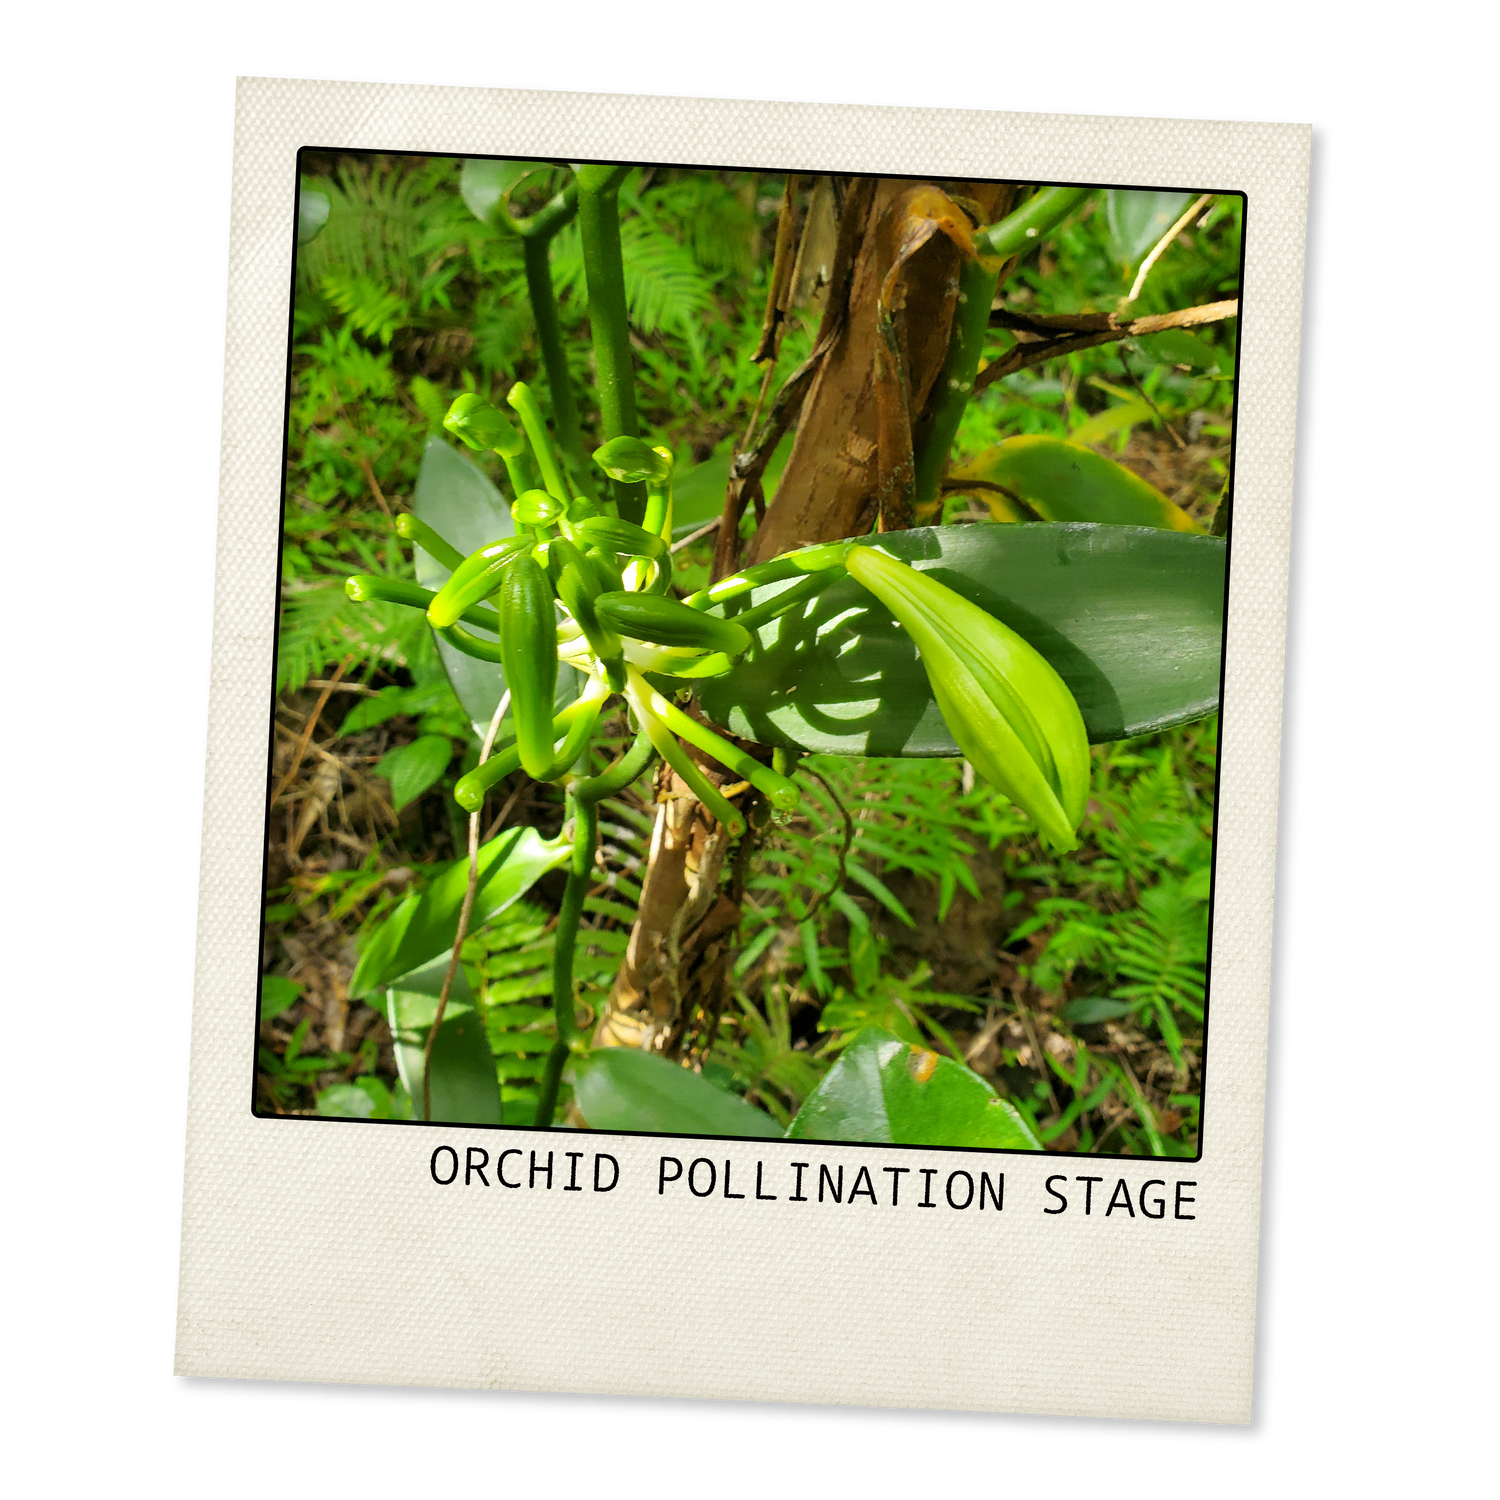 photo of a vanilla orchid in the pollination stage in the Comoros Islands